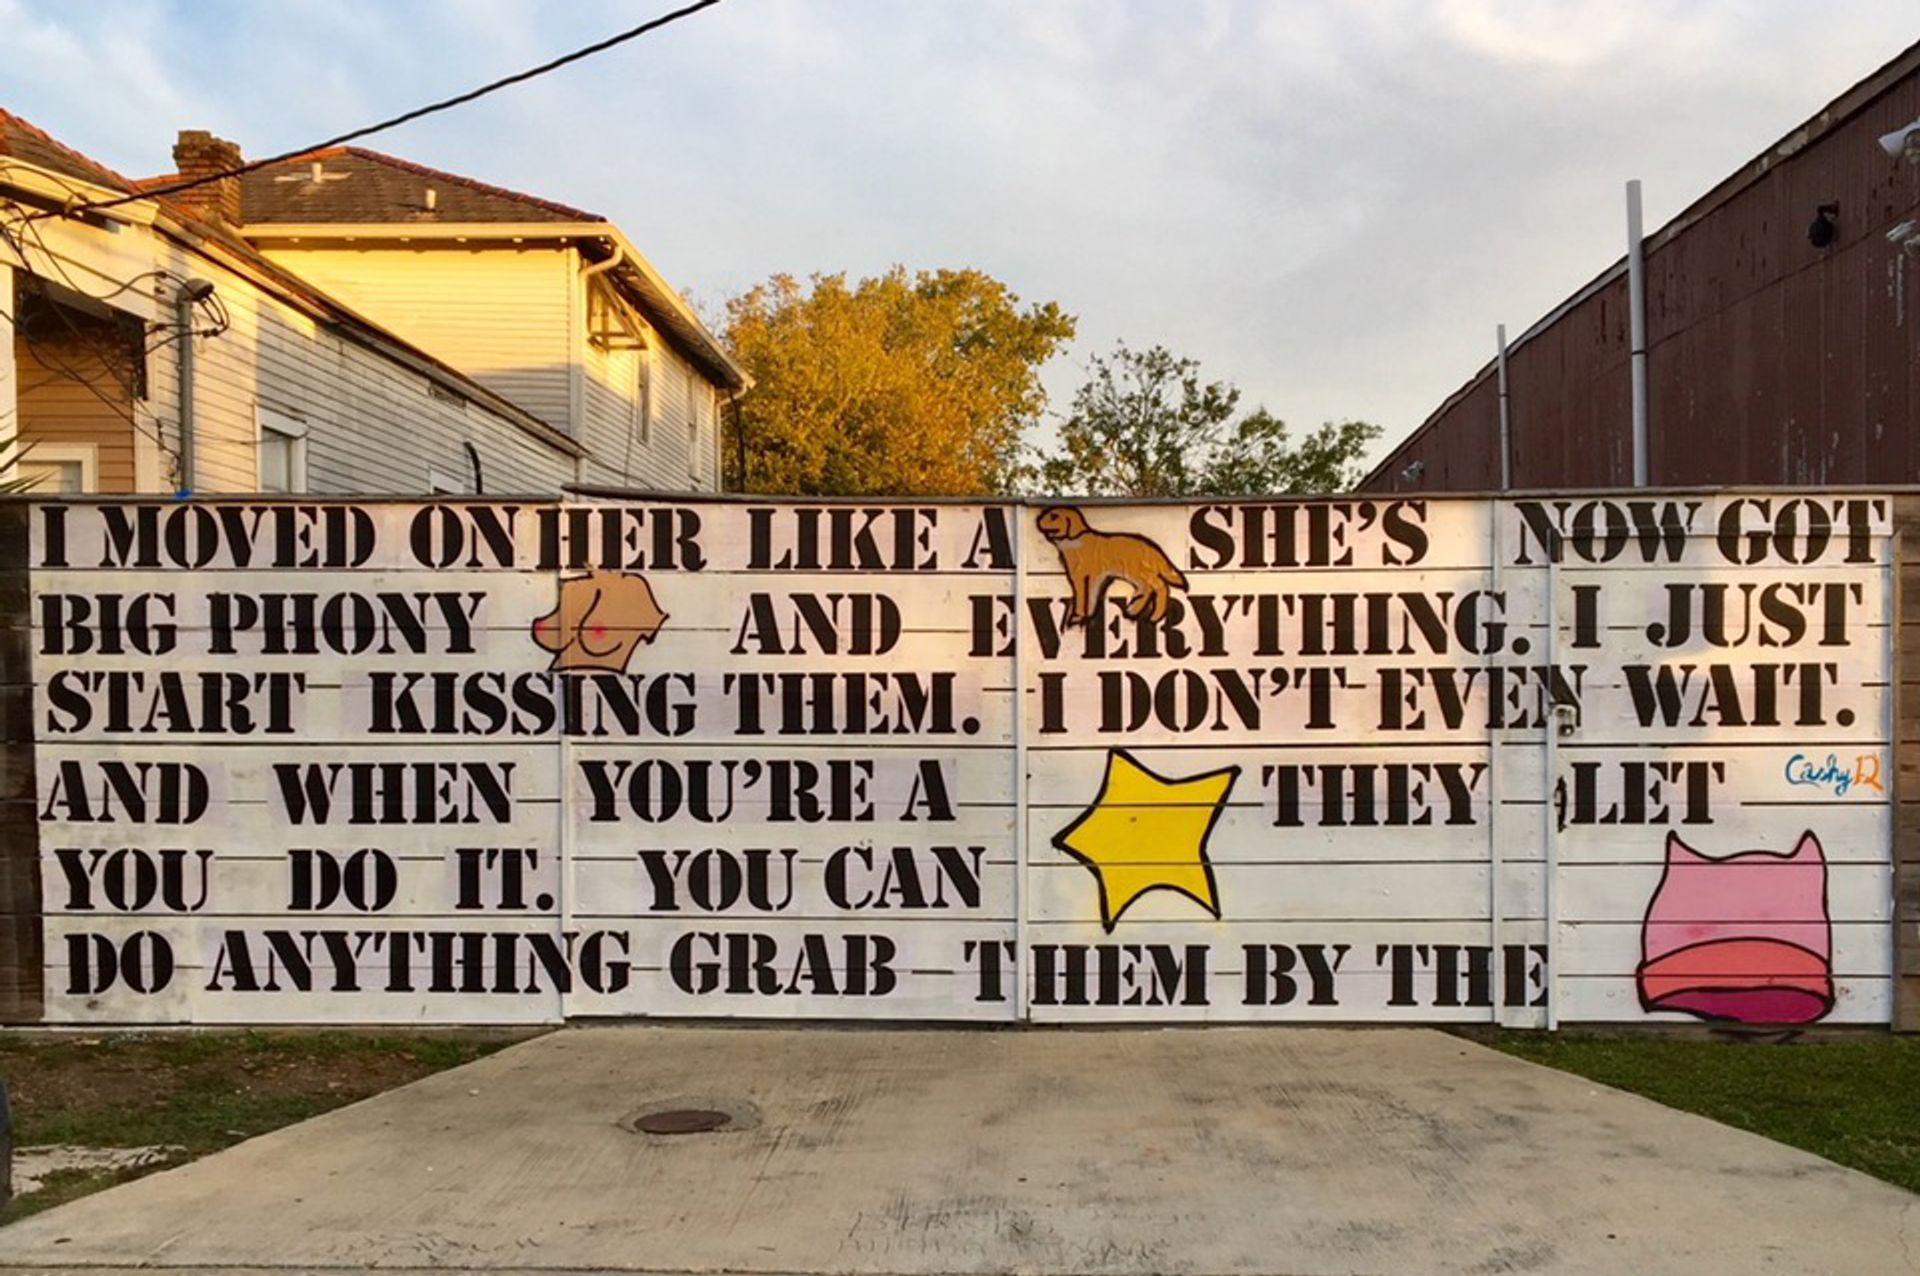 The mural, by the artist Cashy-D, depicts a quote from the 2005 Access Hollywood Tape in which US President Donald Trump brags about grabbing women’s genitals with impunity—with select nouns replaced by images Neal Morris